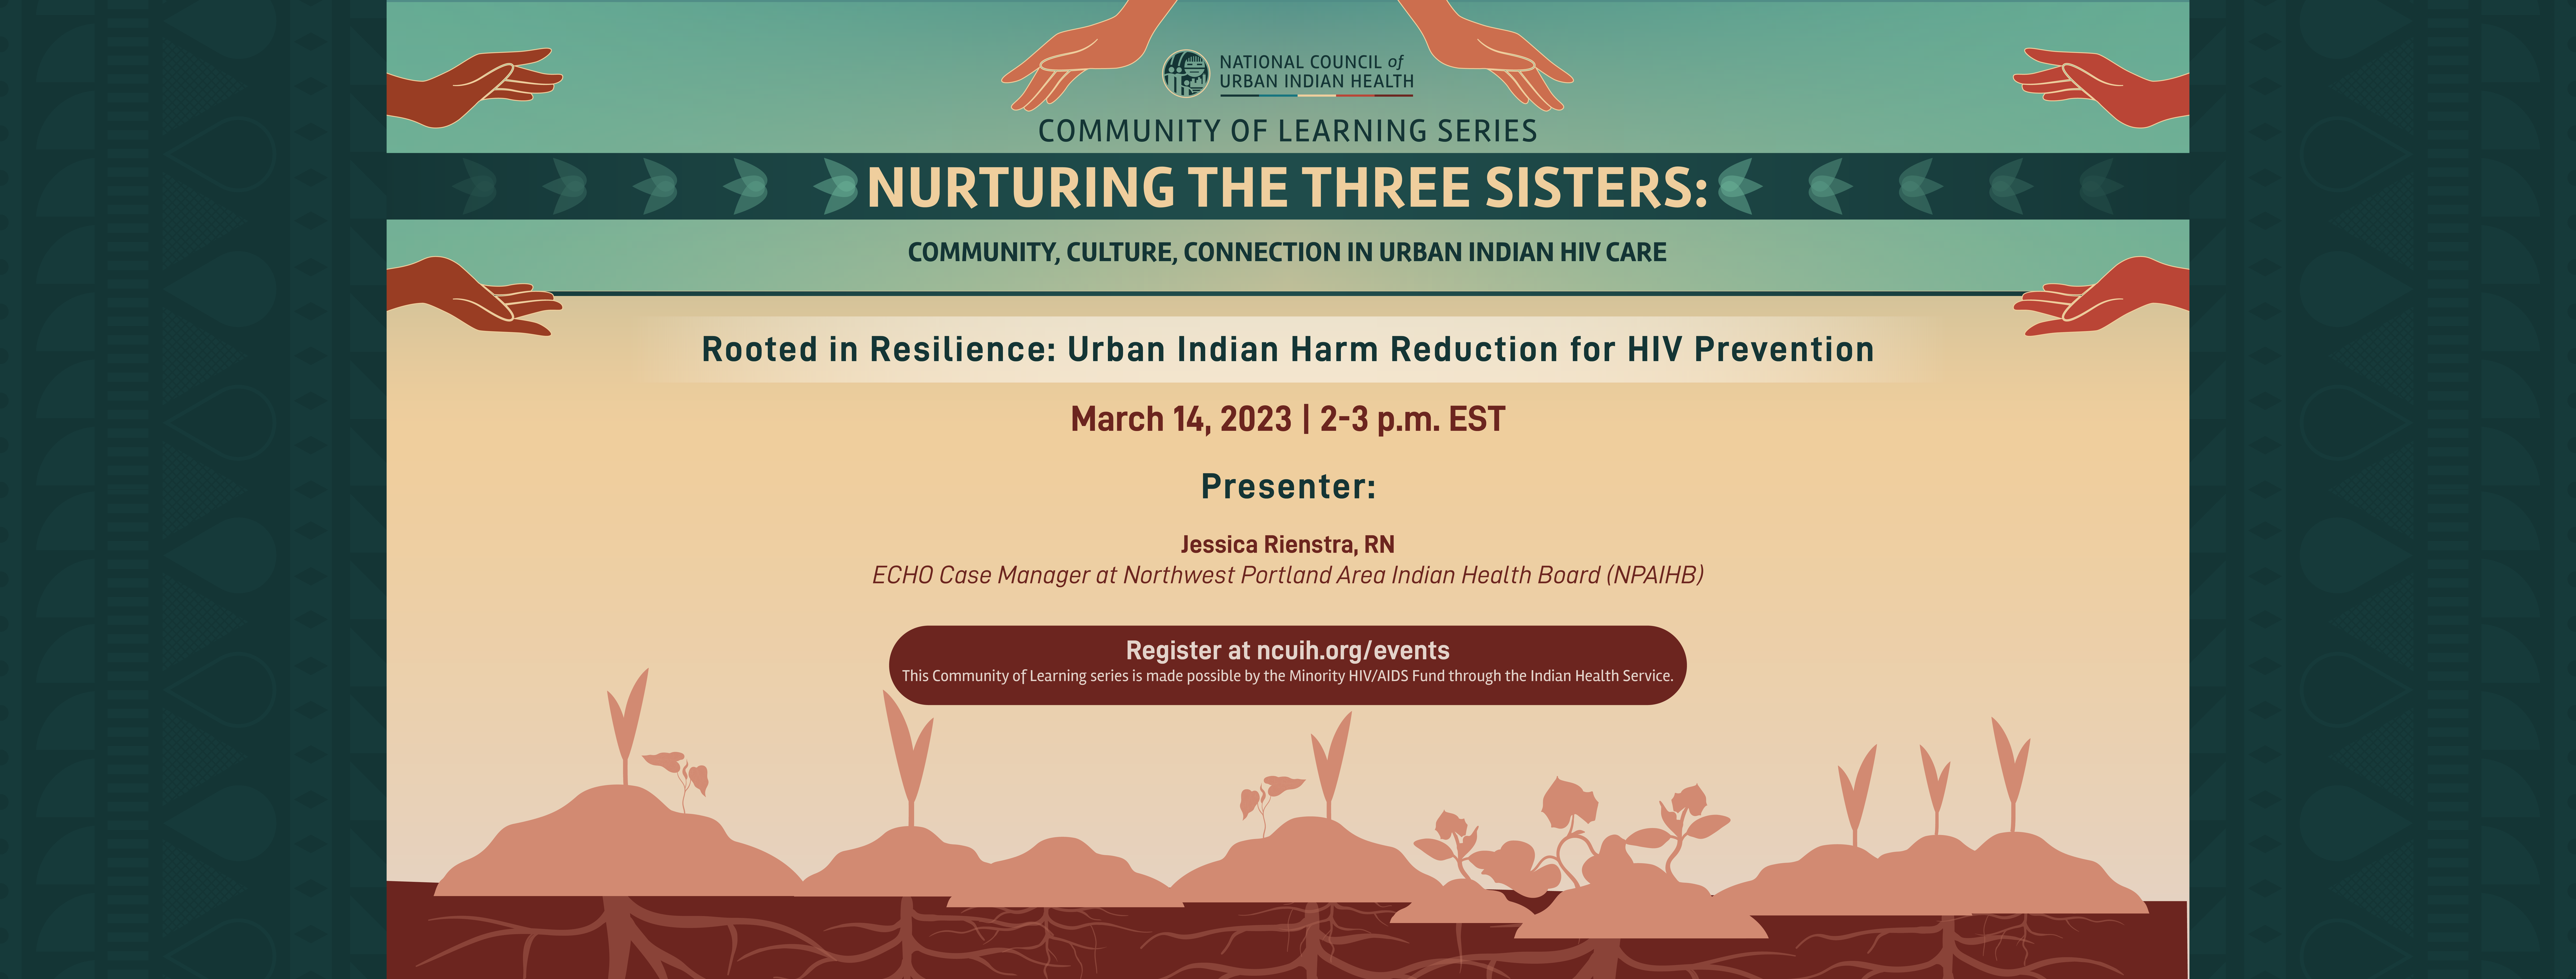 Nurturing the Three Sisters: Community, Culture, Connection in Urban Indian HIV Care